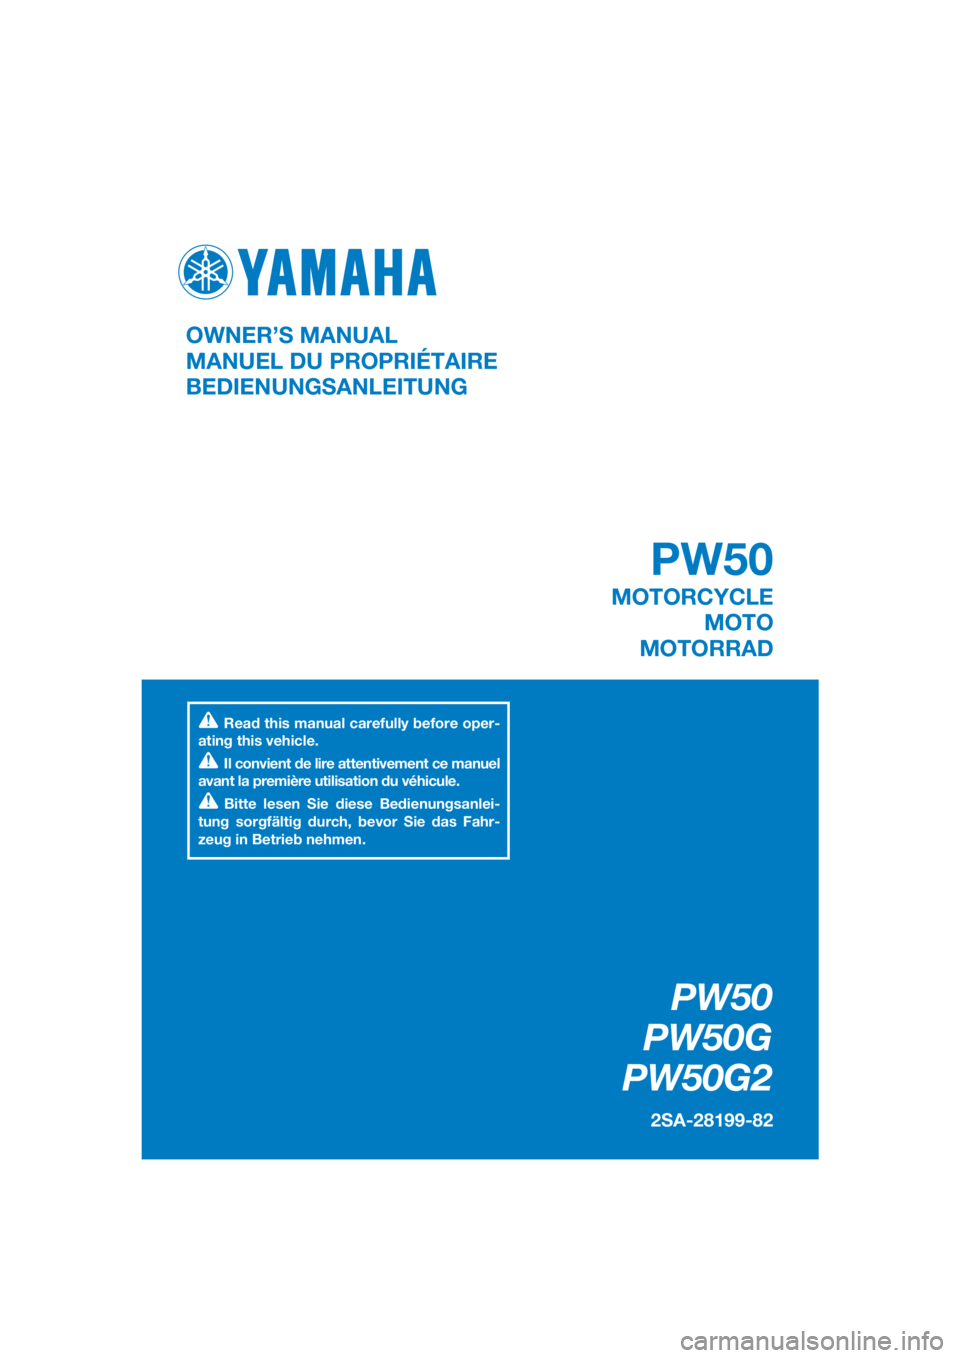 YAMAHA PW50 2016  Betriebsanleitungen (in German) DIC183
PW50
PW50G
PW50G2
2SA-28199-82
OWNER’S MANUAL
MANUEL DU PROPRIÉTAIRE
BEDIENUNGSANLEITUNG
Read this manual carefully before oper-
ating this vehicle.
Il convient de lire attentivement ce manu